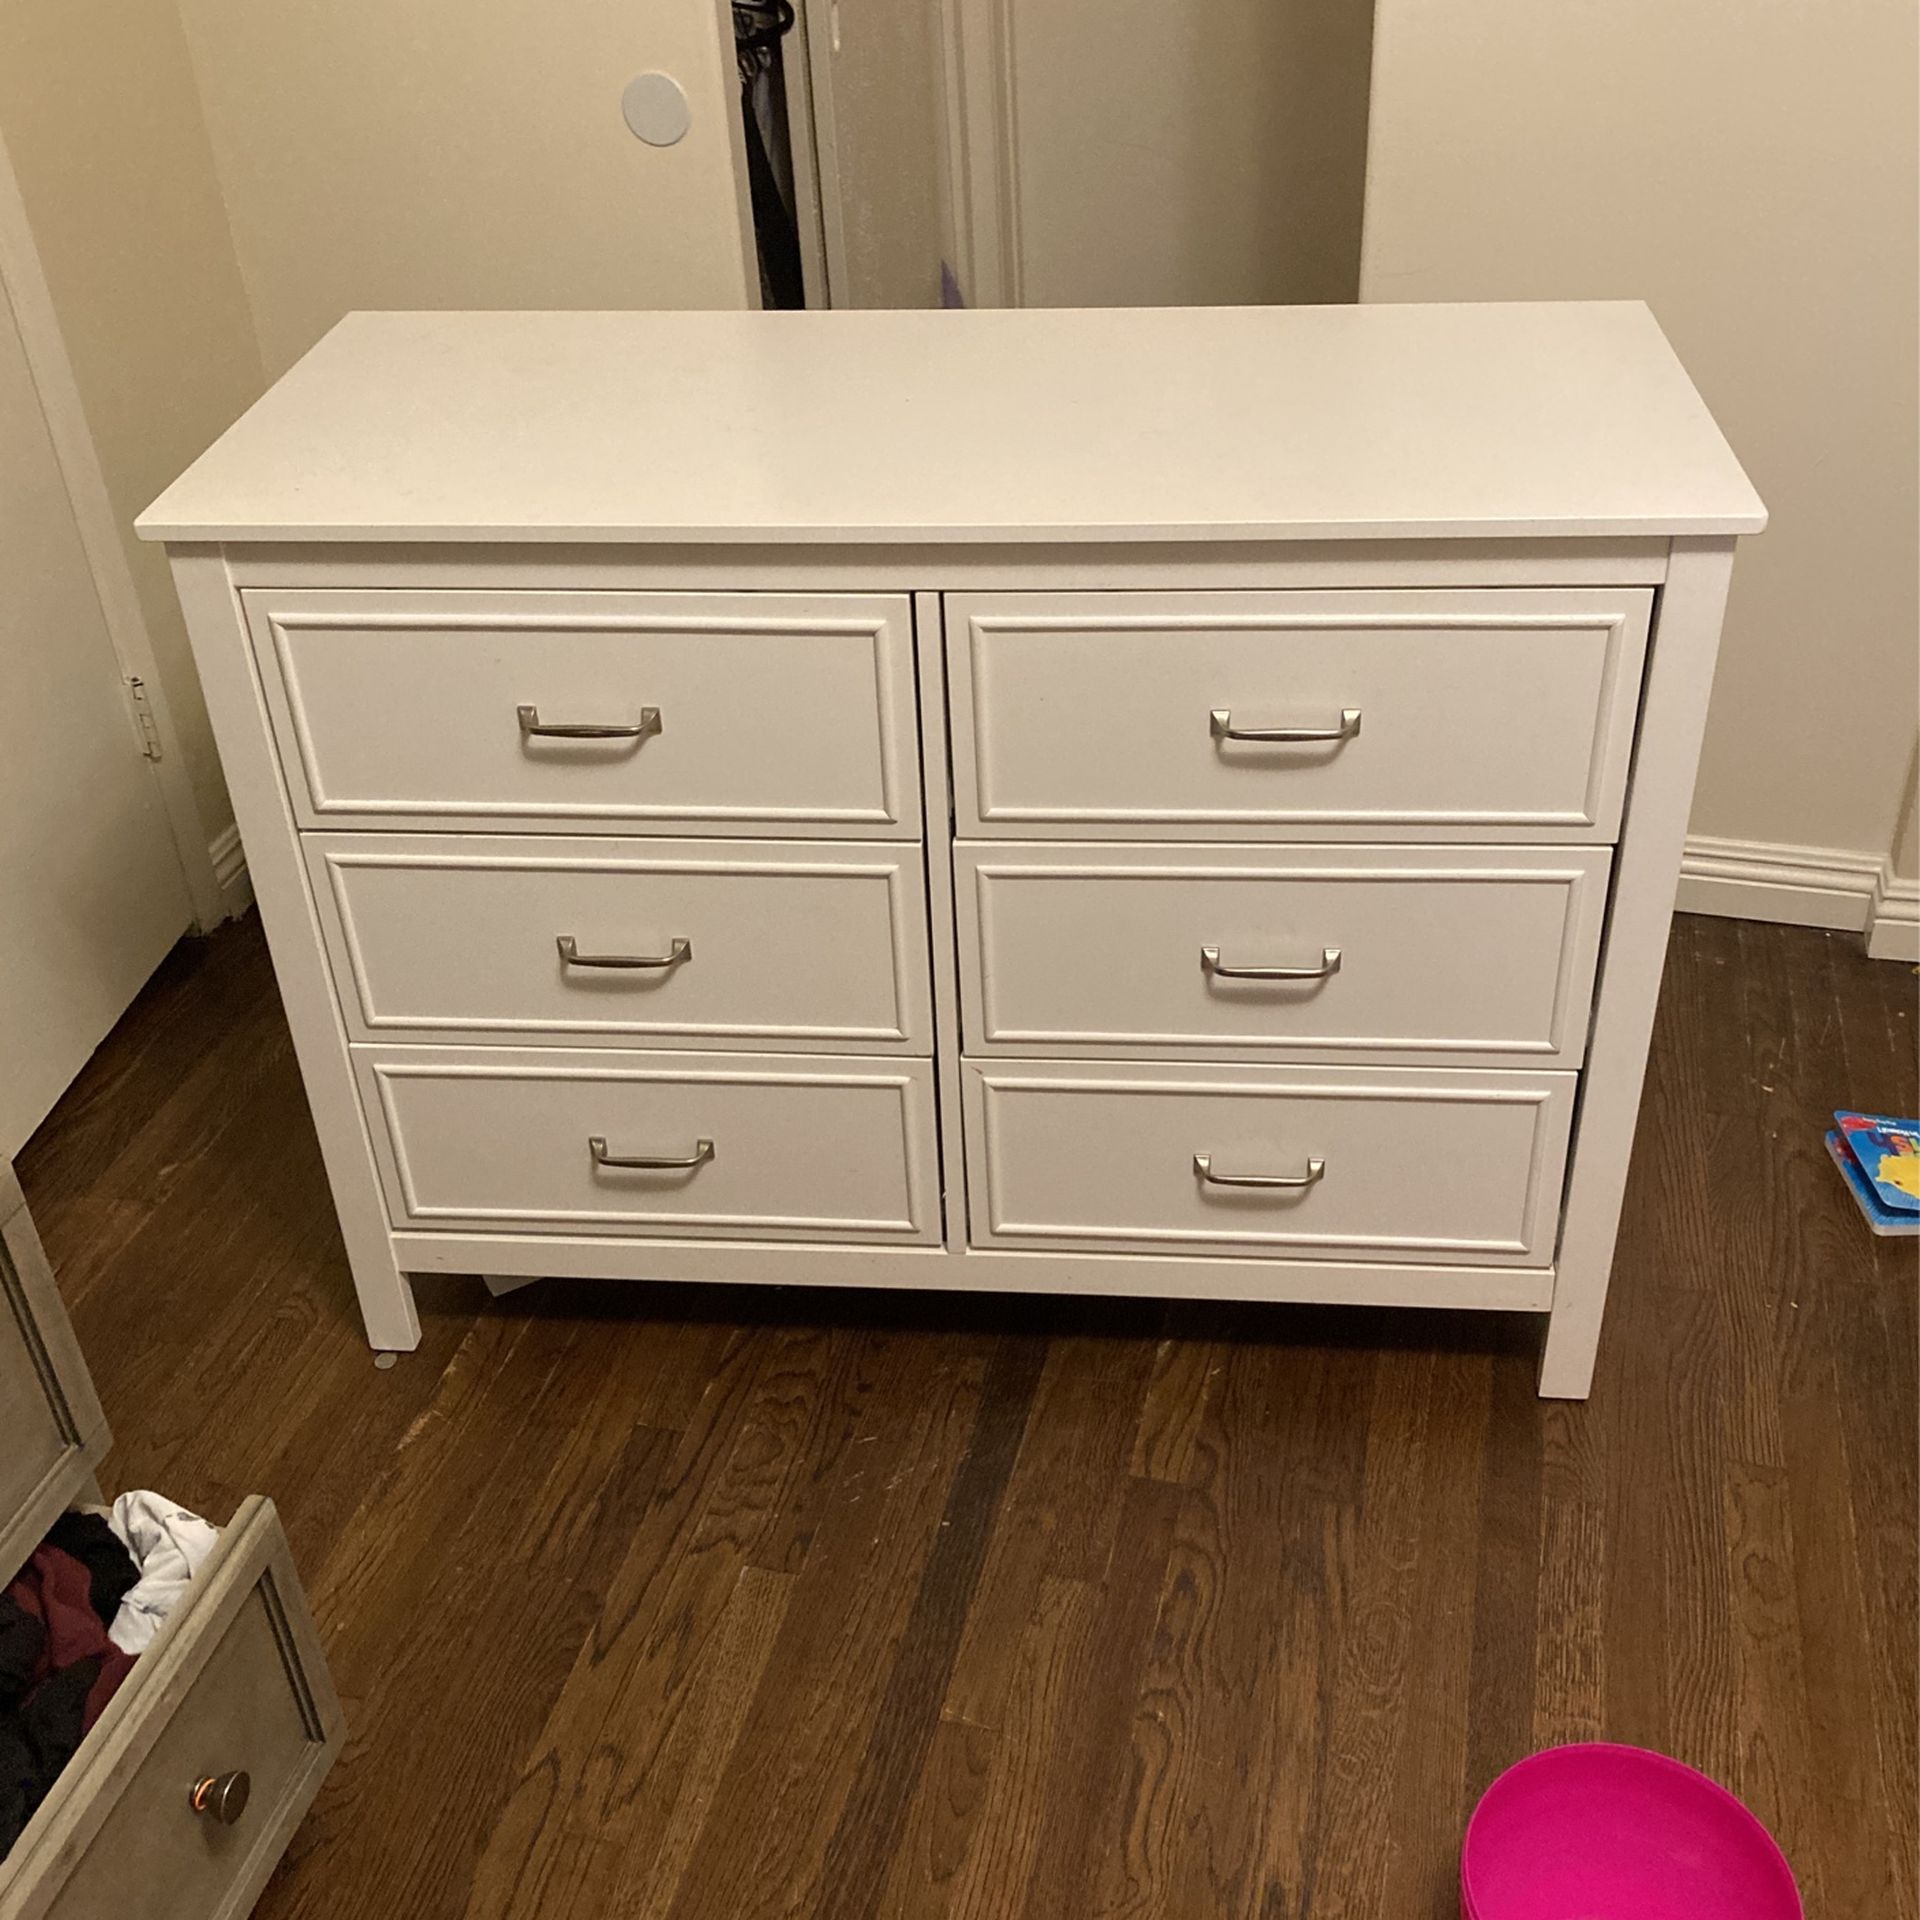 Buybuybaby Furniture Baby Dresser Changing Table